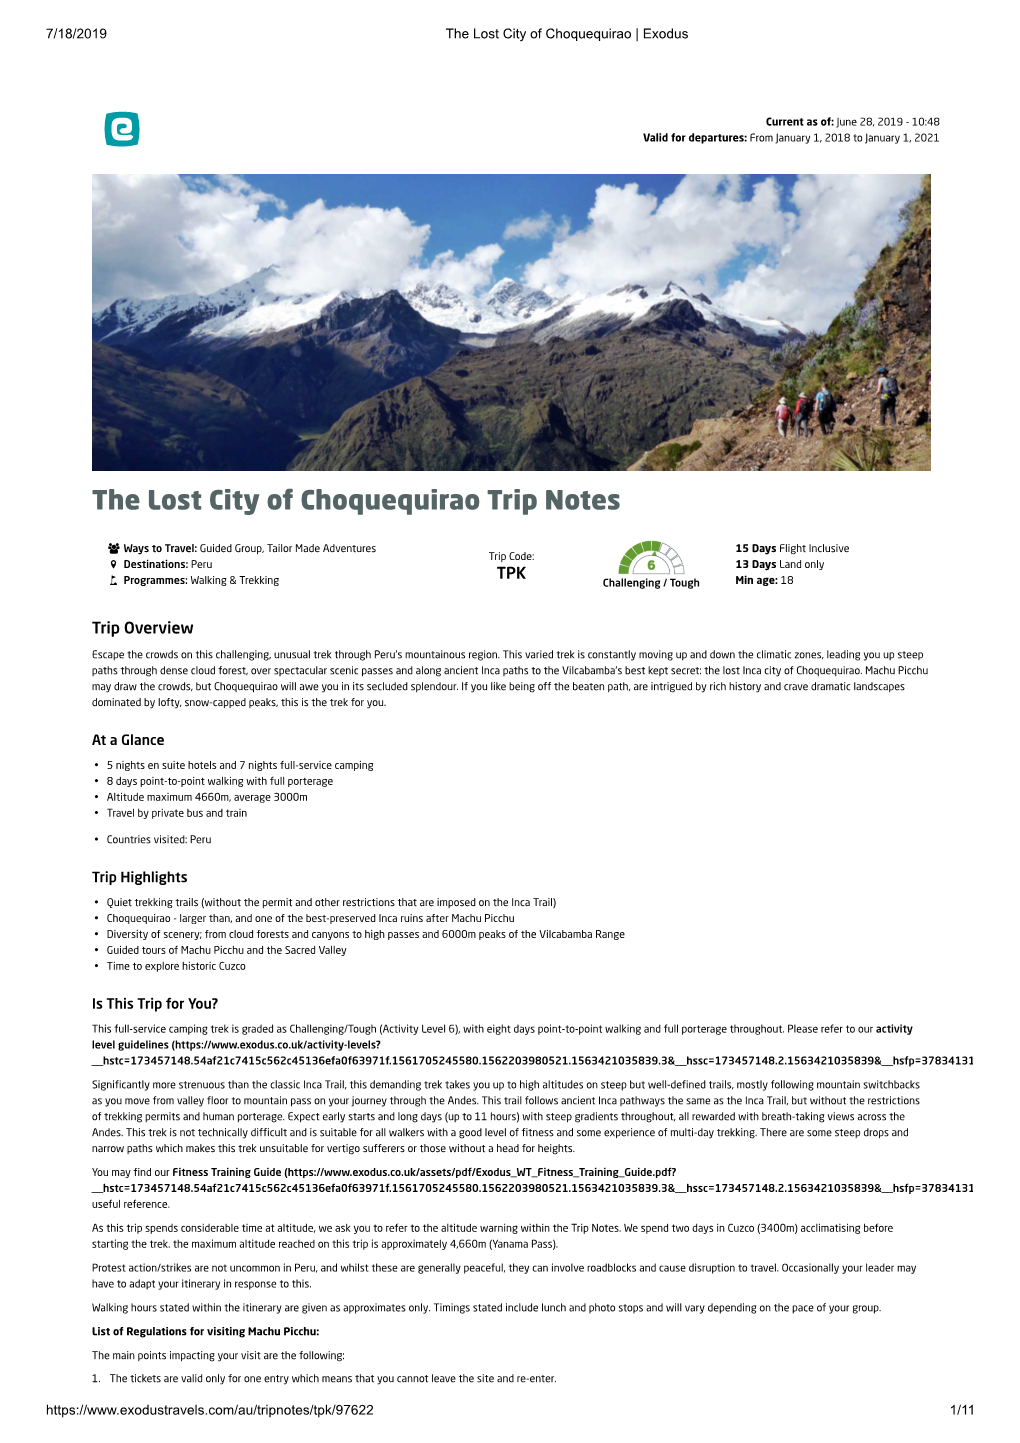 The Lost City of Choquequirao Trip Notes